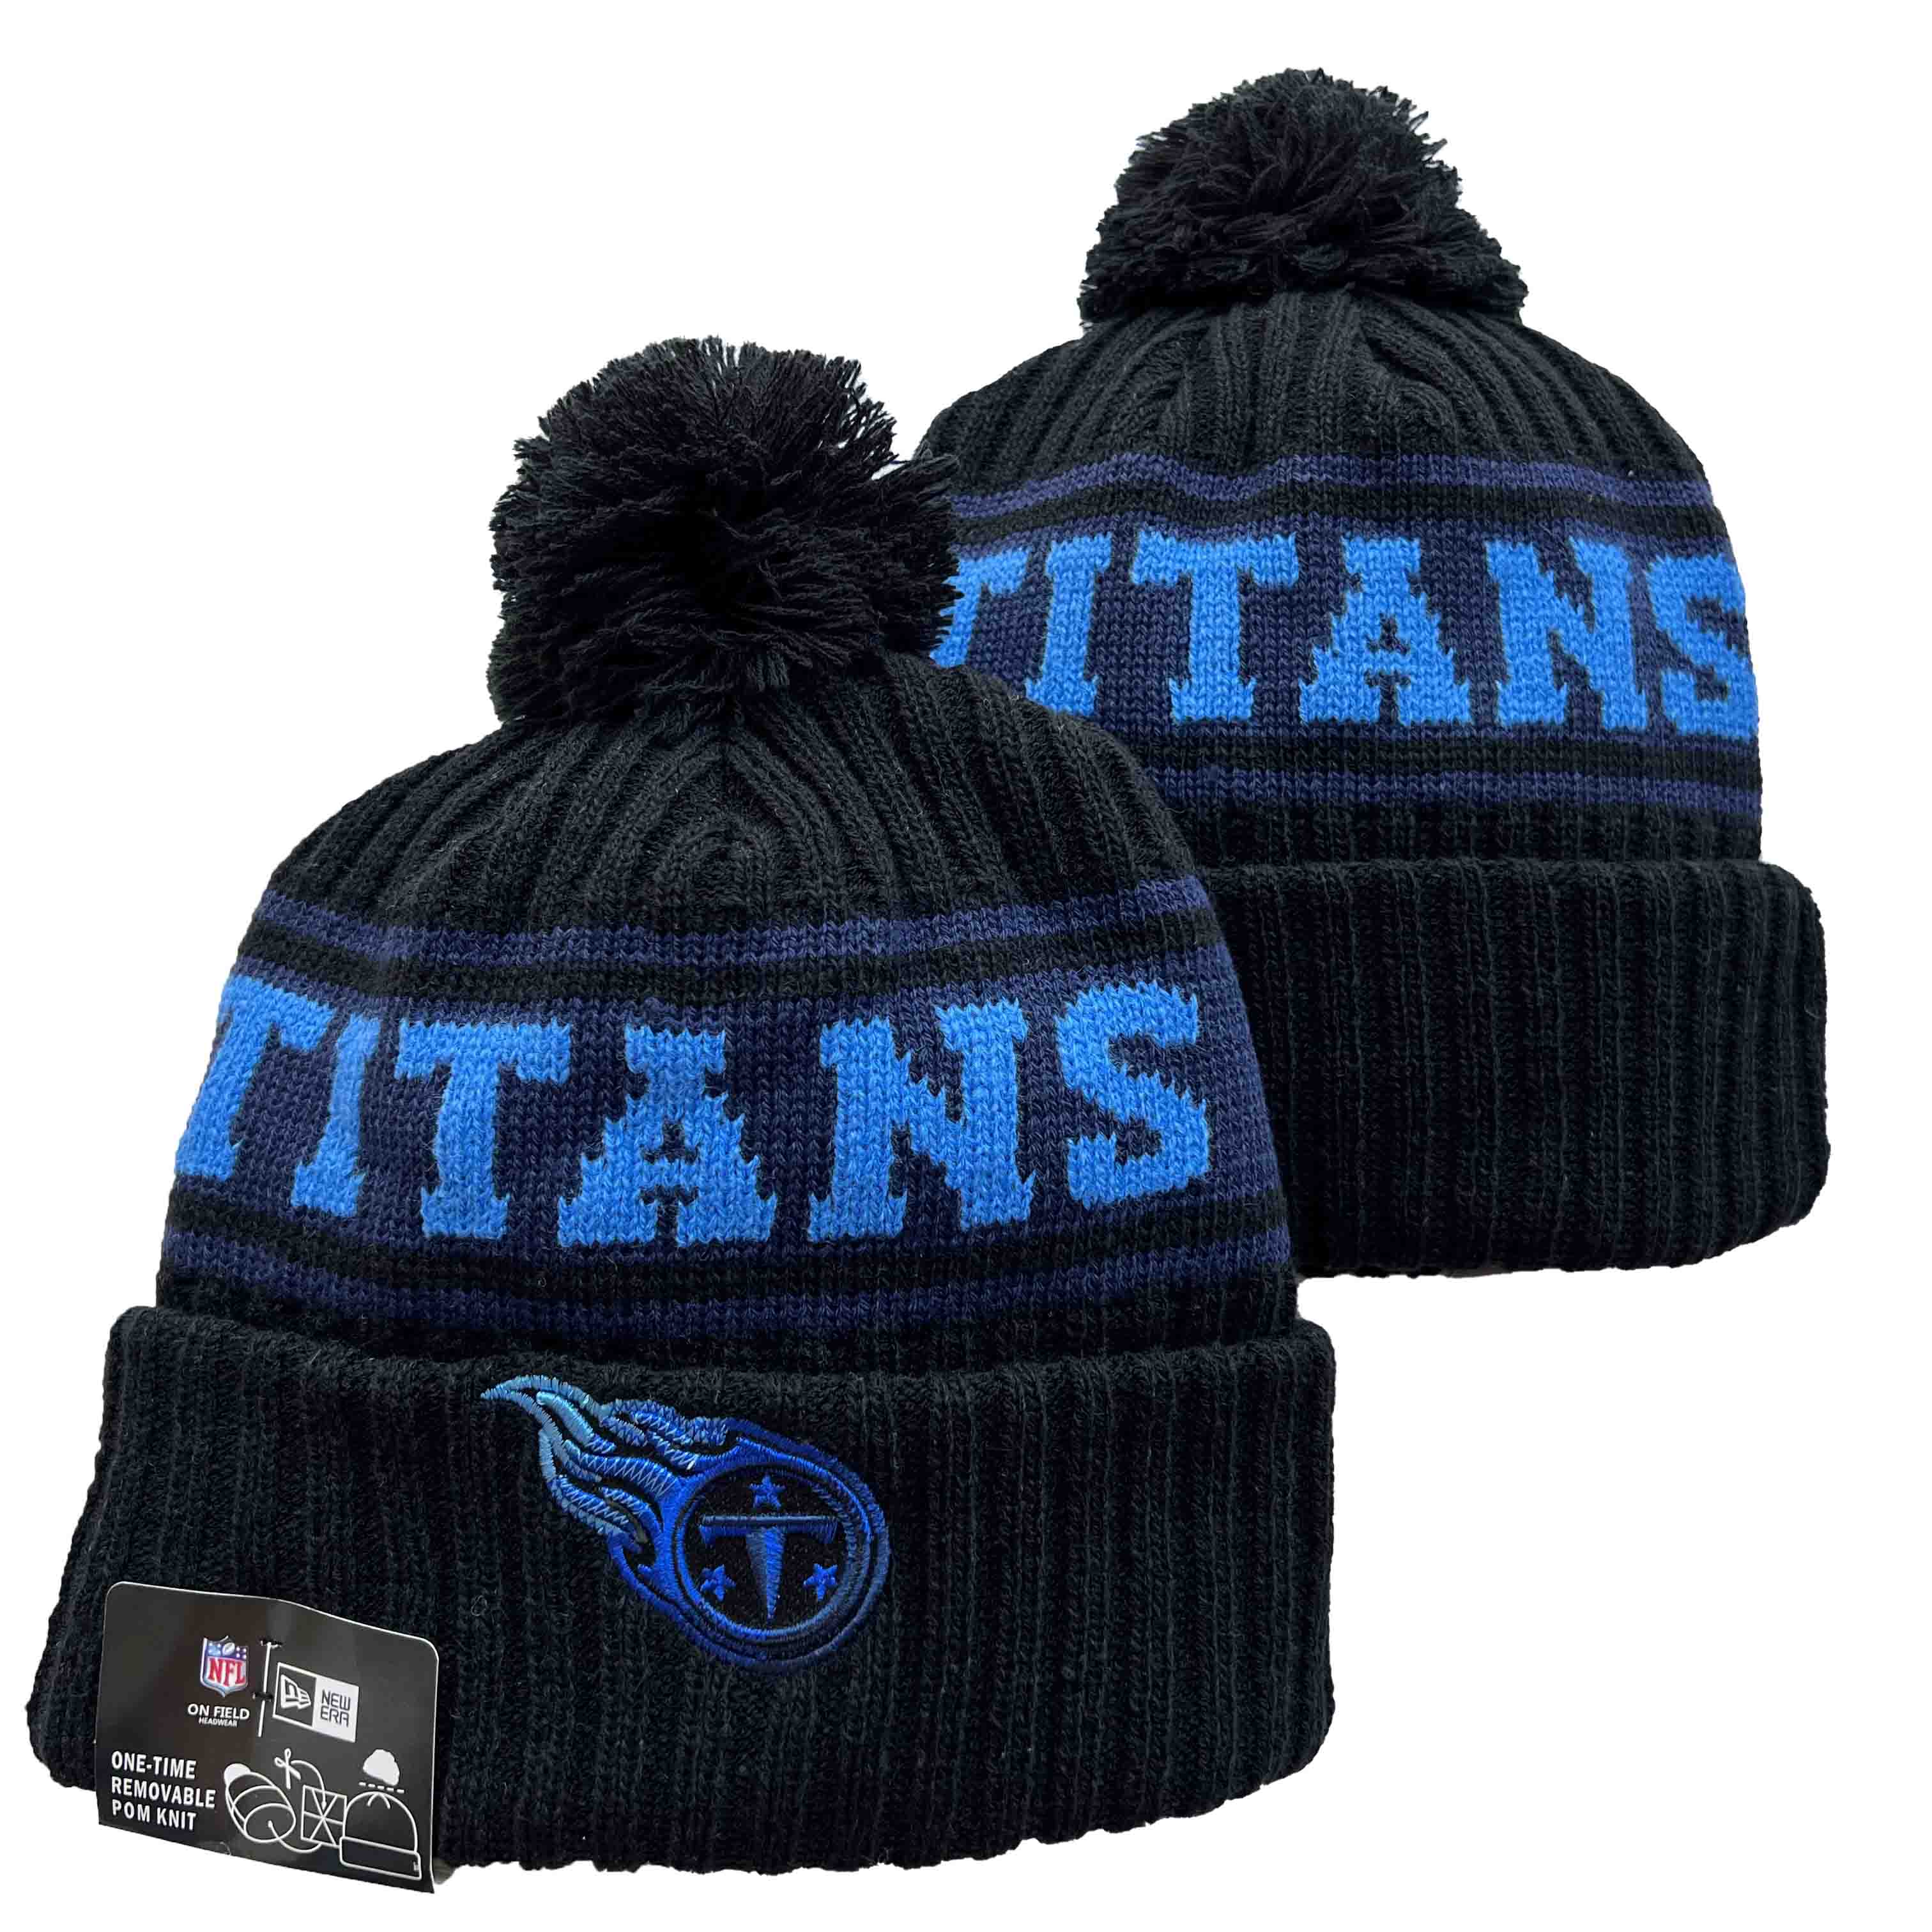 NFL Tennessee Titans Beanies Knit Hats-YD1318